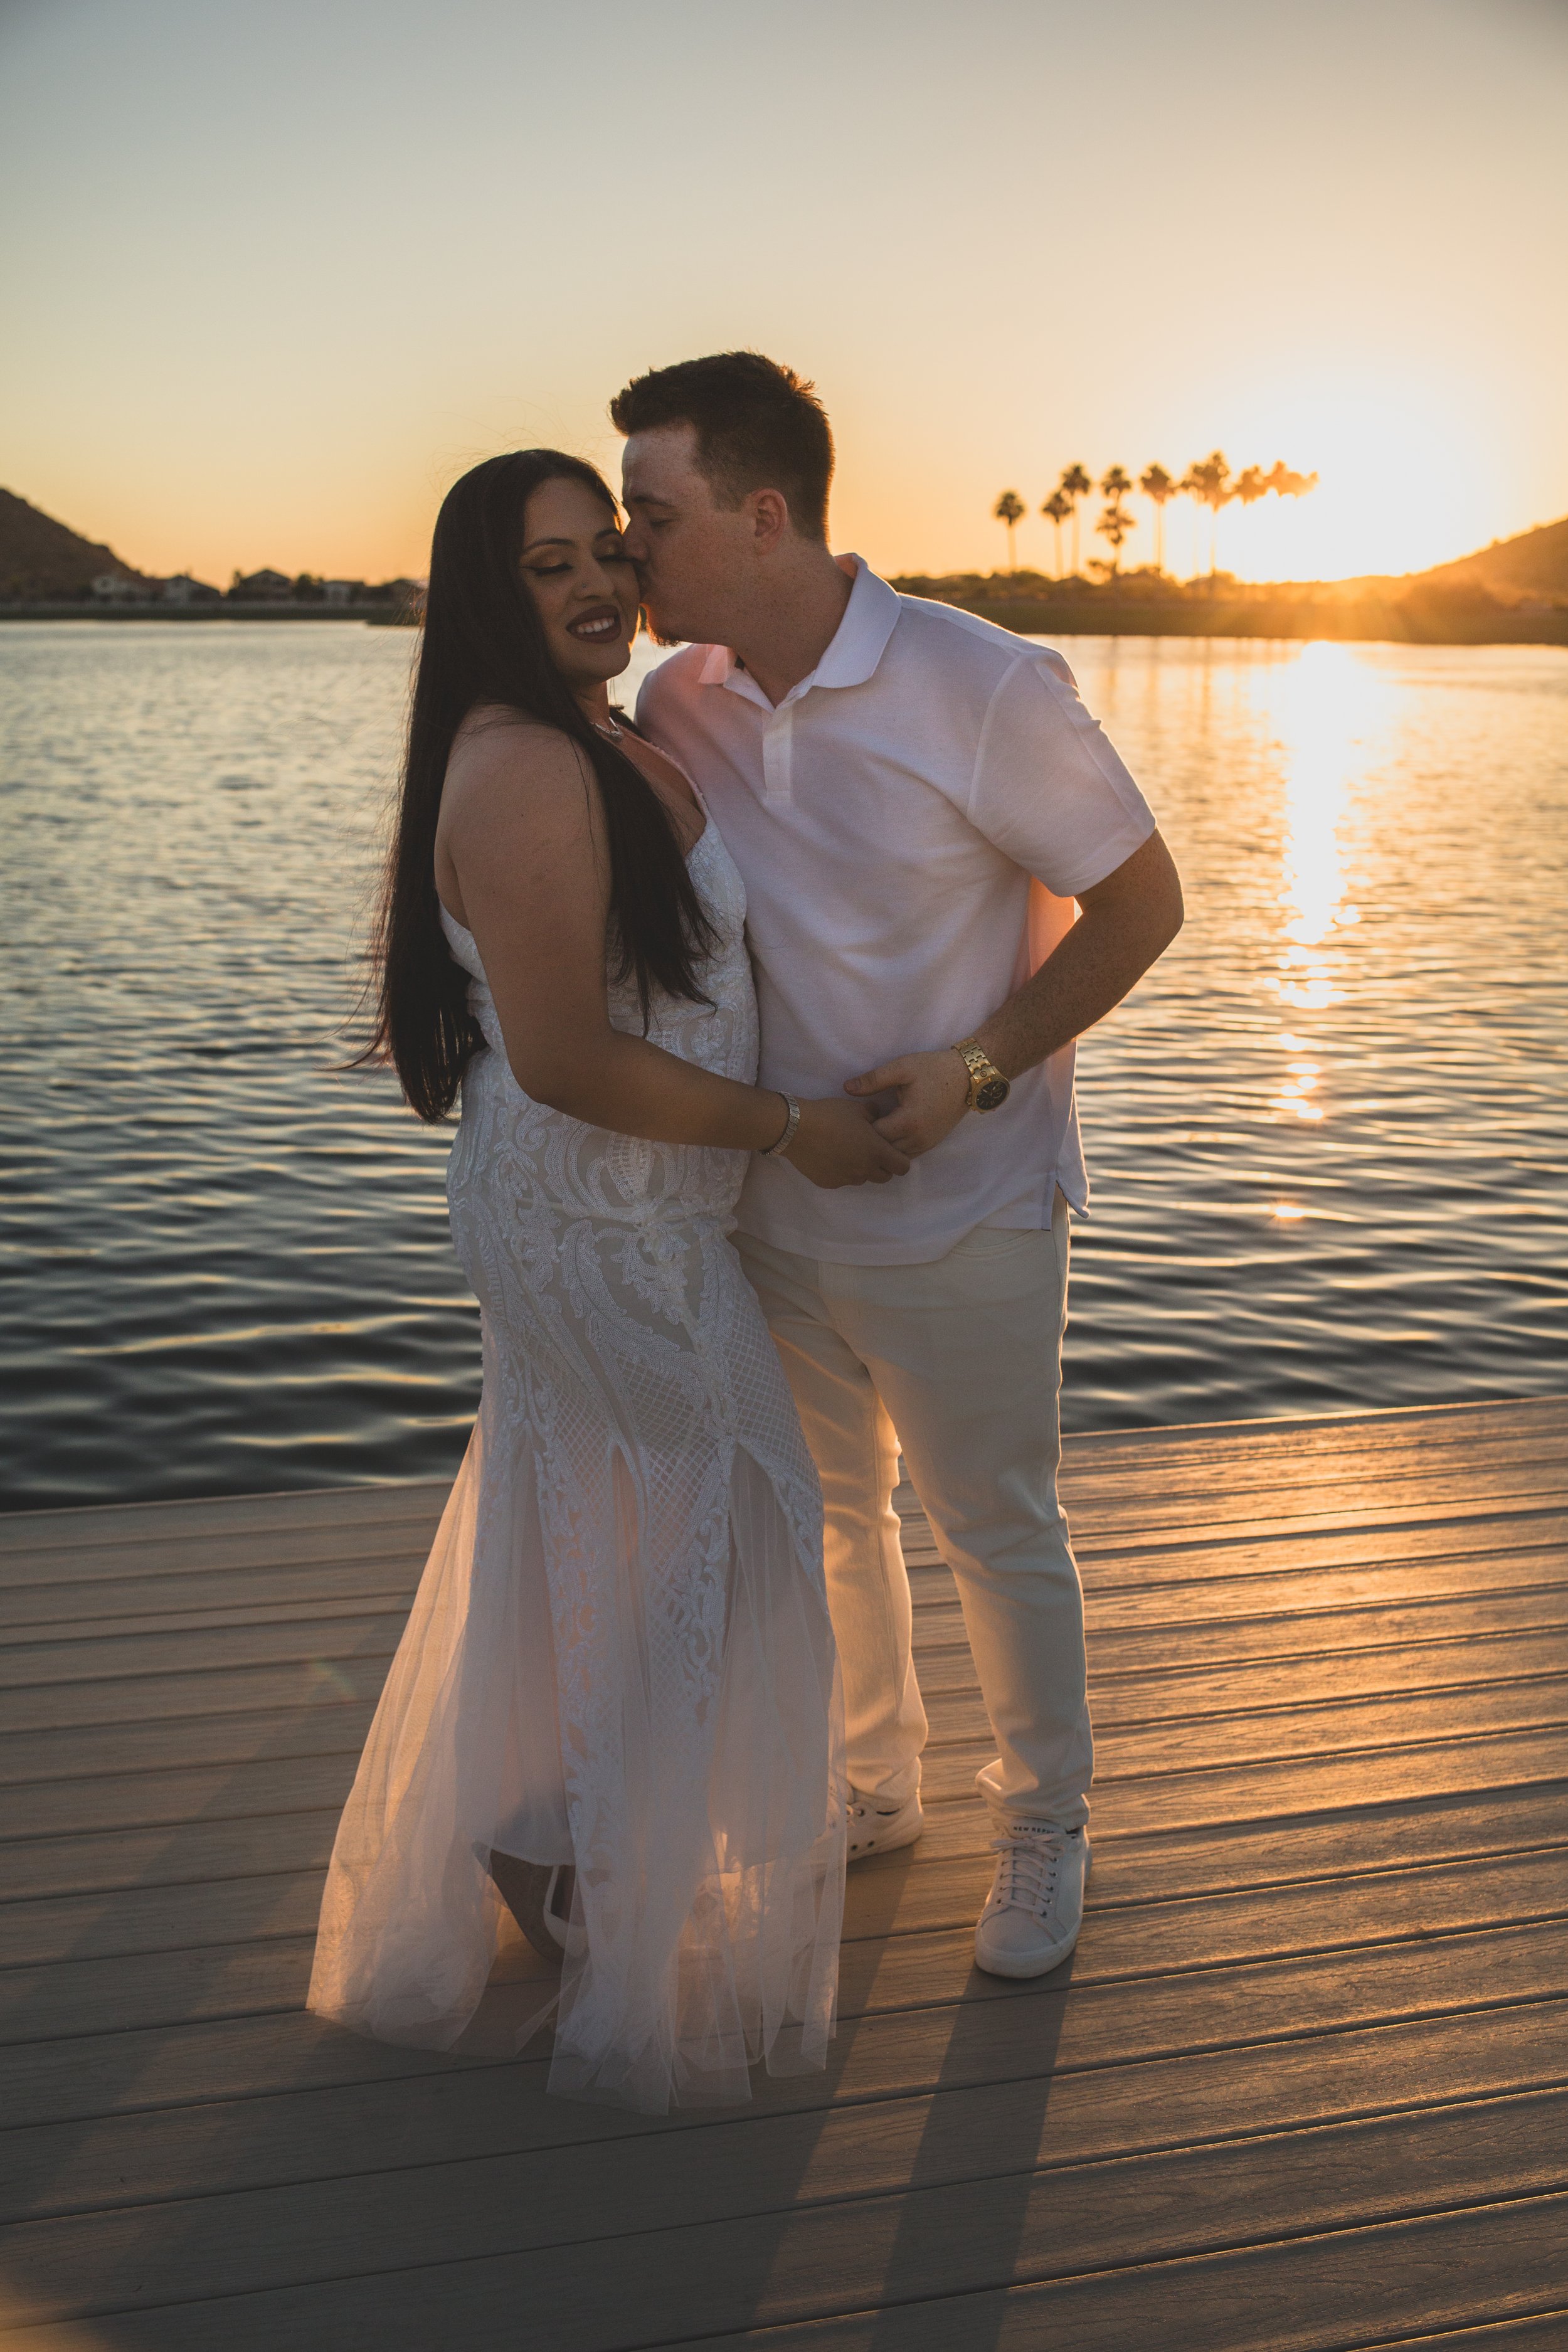 Couple poses together for their Estrella Mountain  engagement session in Phoenix, Arizona by epic Wedding Photographer; Jennifer Lind Schutsky.